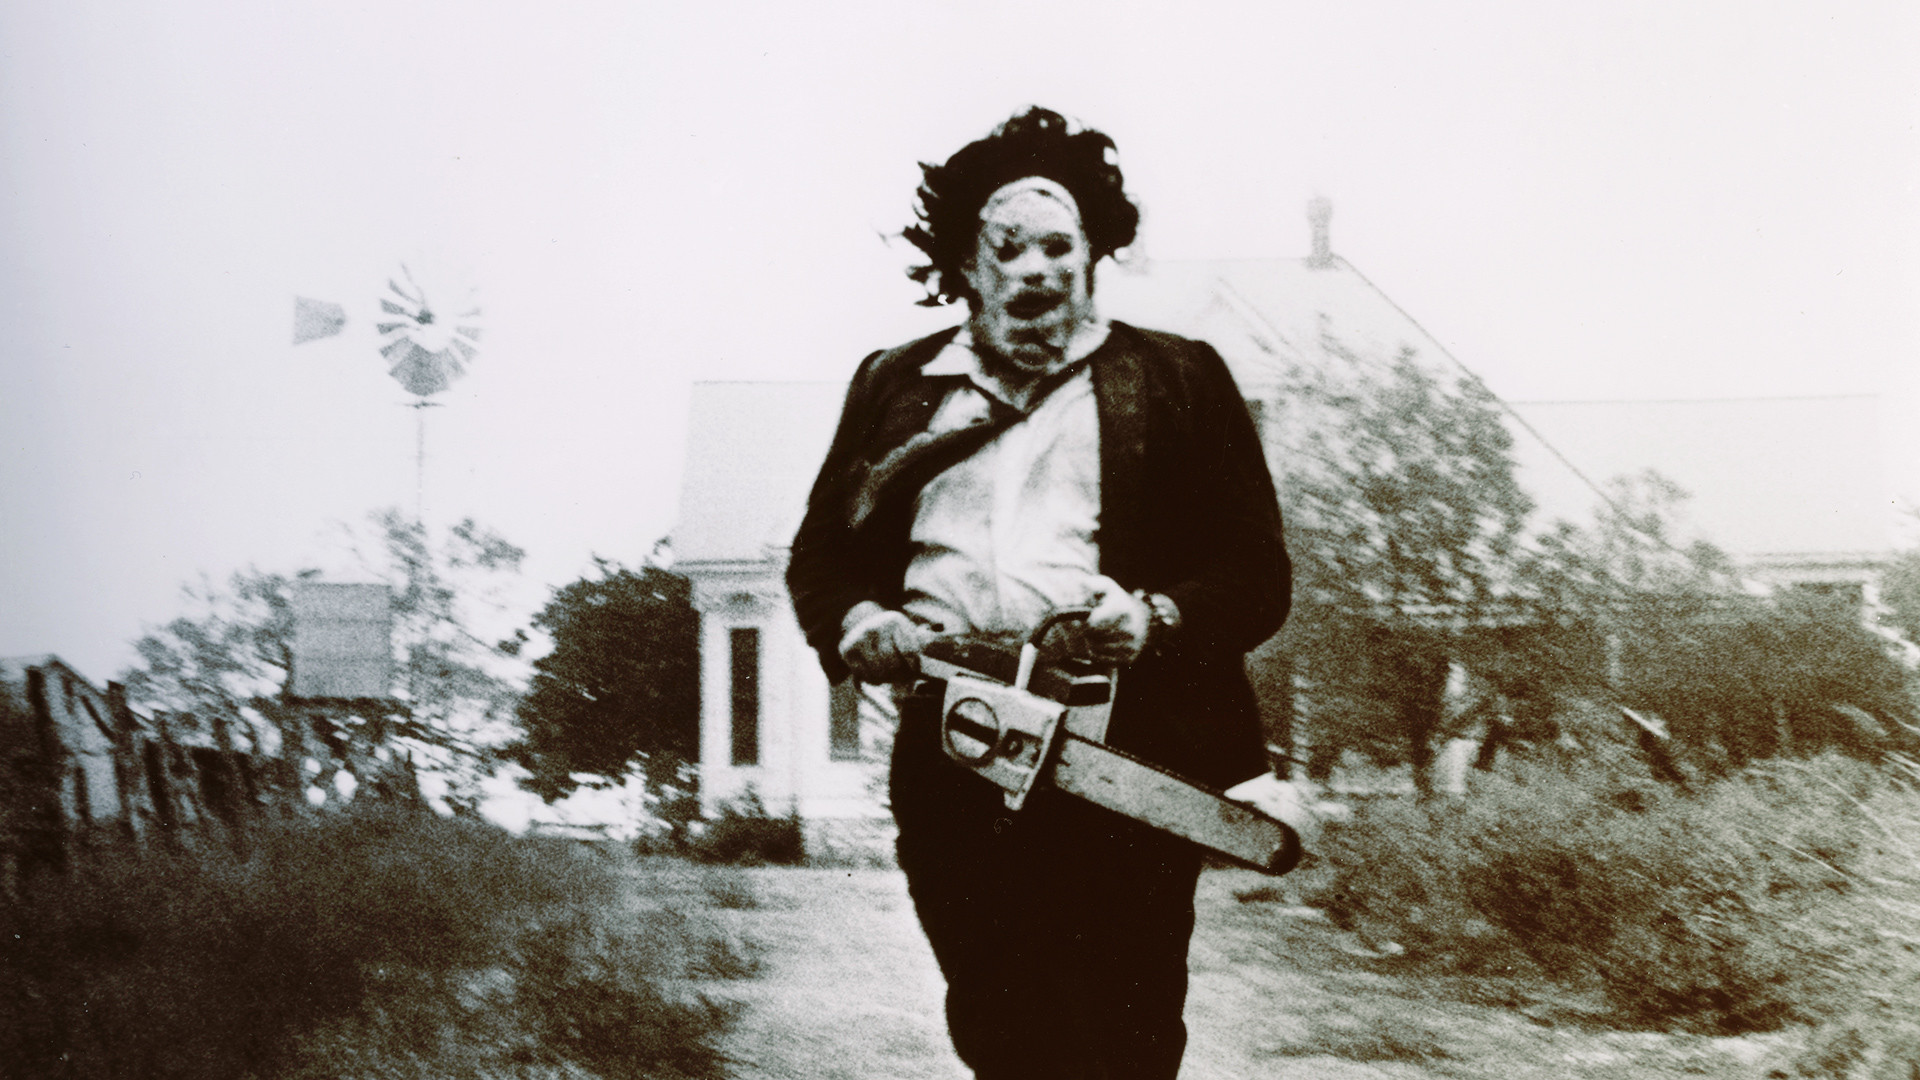 1920x1080 Texas Chainsaw Massacre Wallpapers